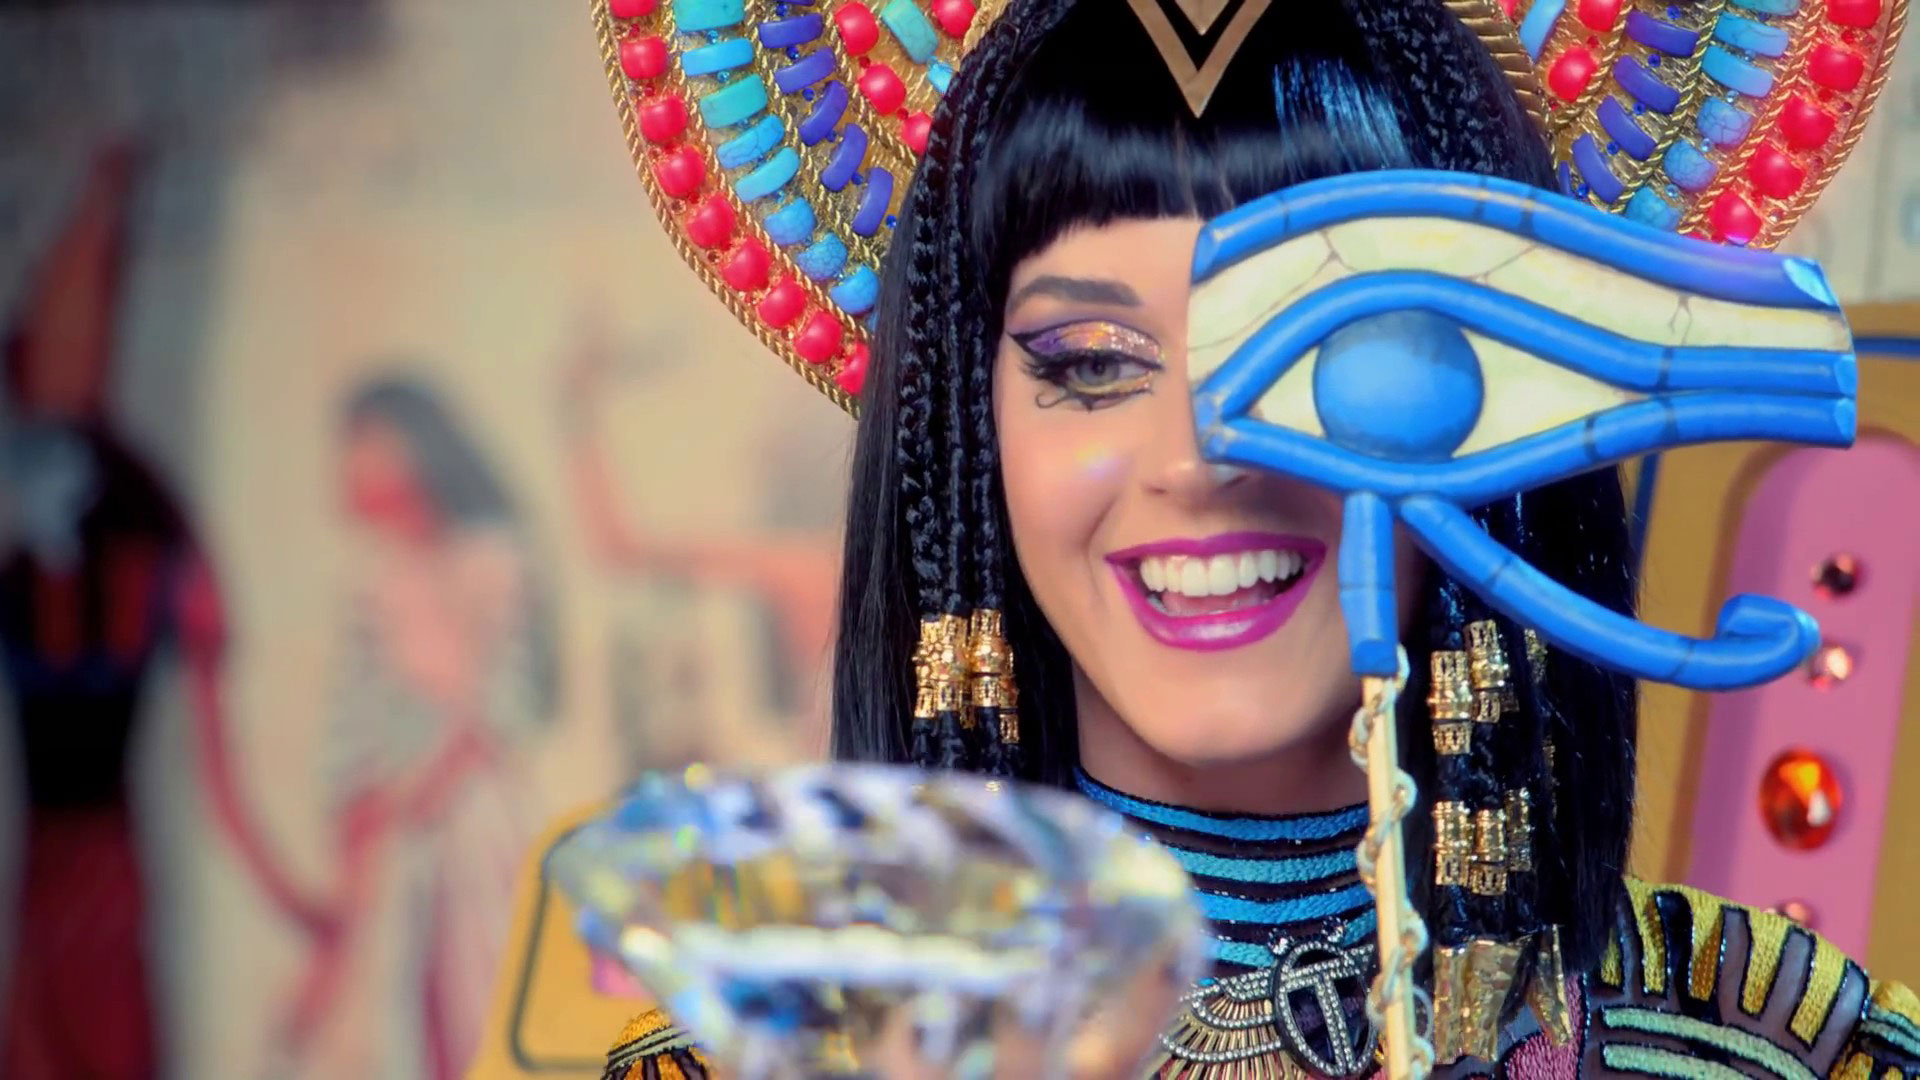 Katy Perry loses copyright suit over her hit song 'Dark Horse'